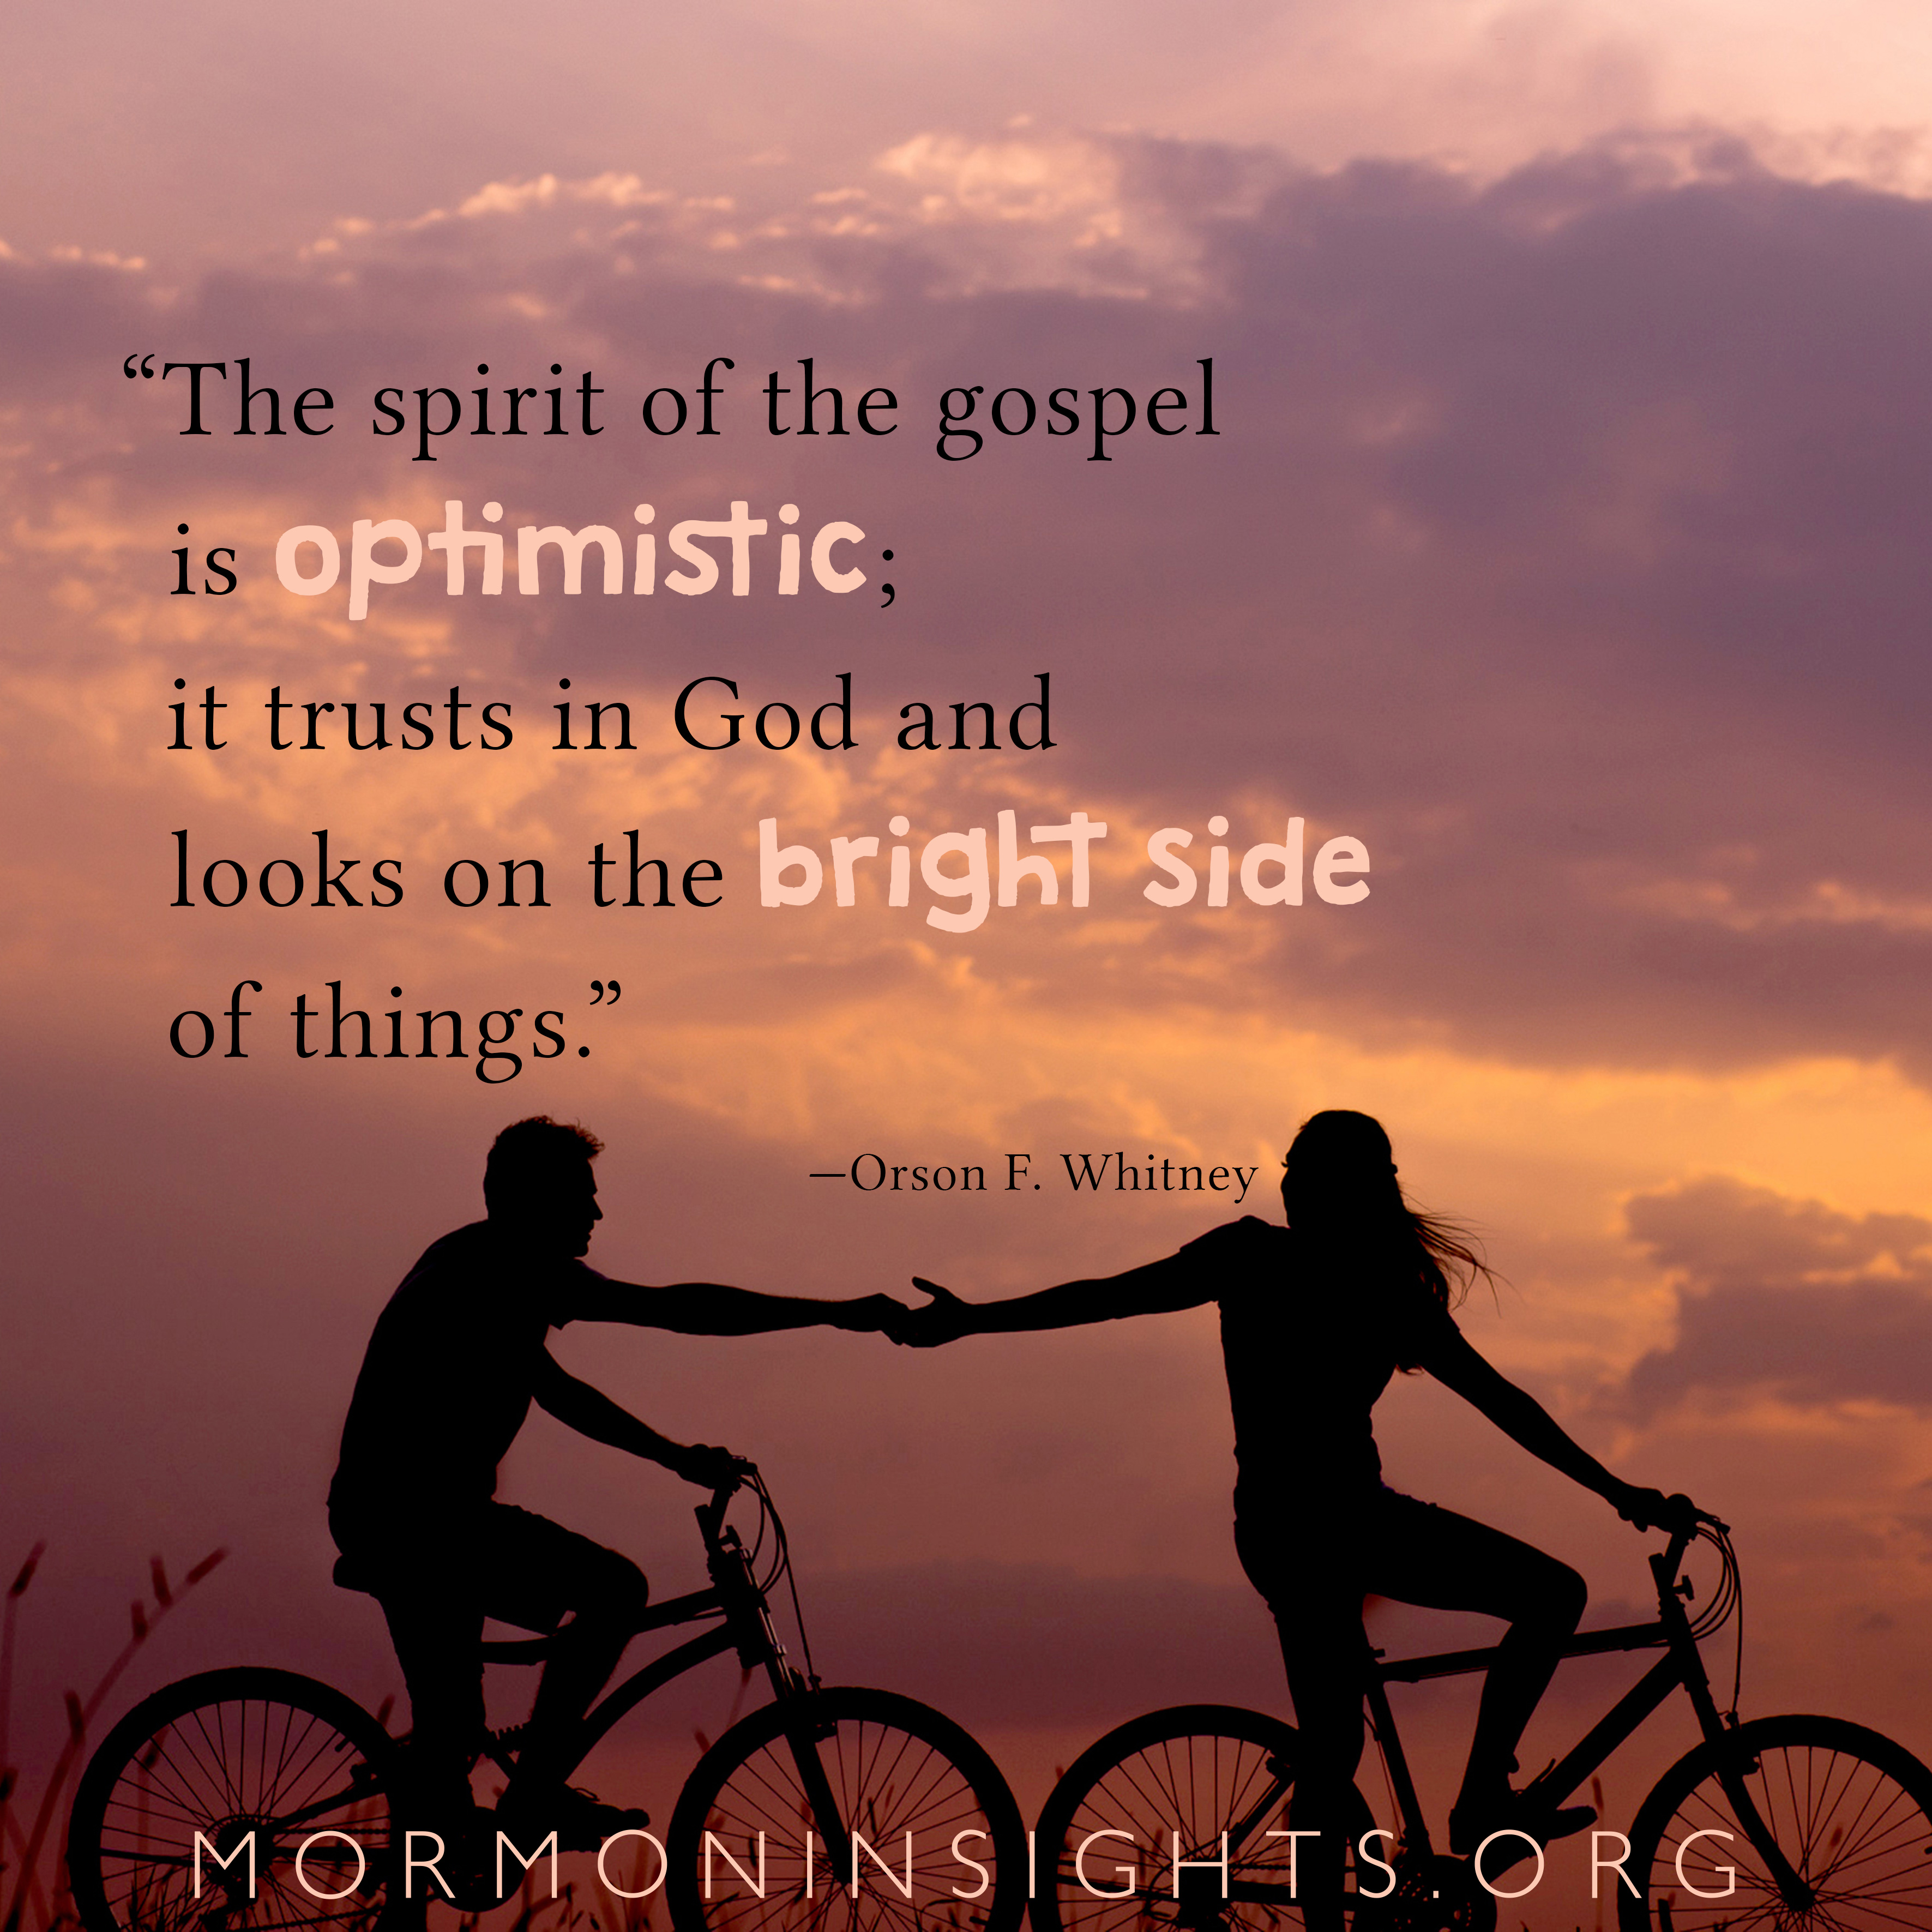 "The spirit of the gospel is optimistic; it trusts in God and looks on the bright side of things." Mormon Insights. silhouettes on bikes.